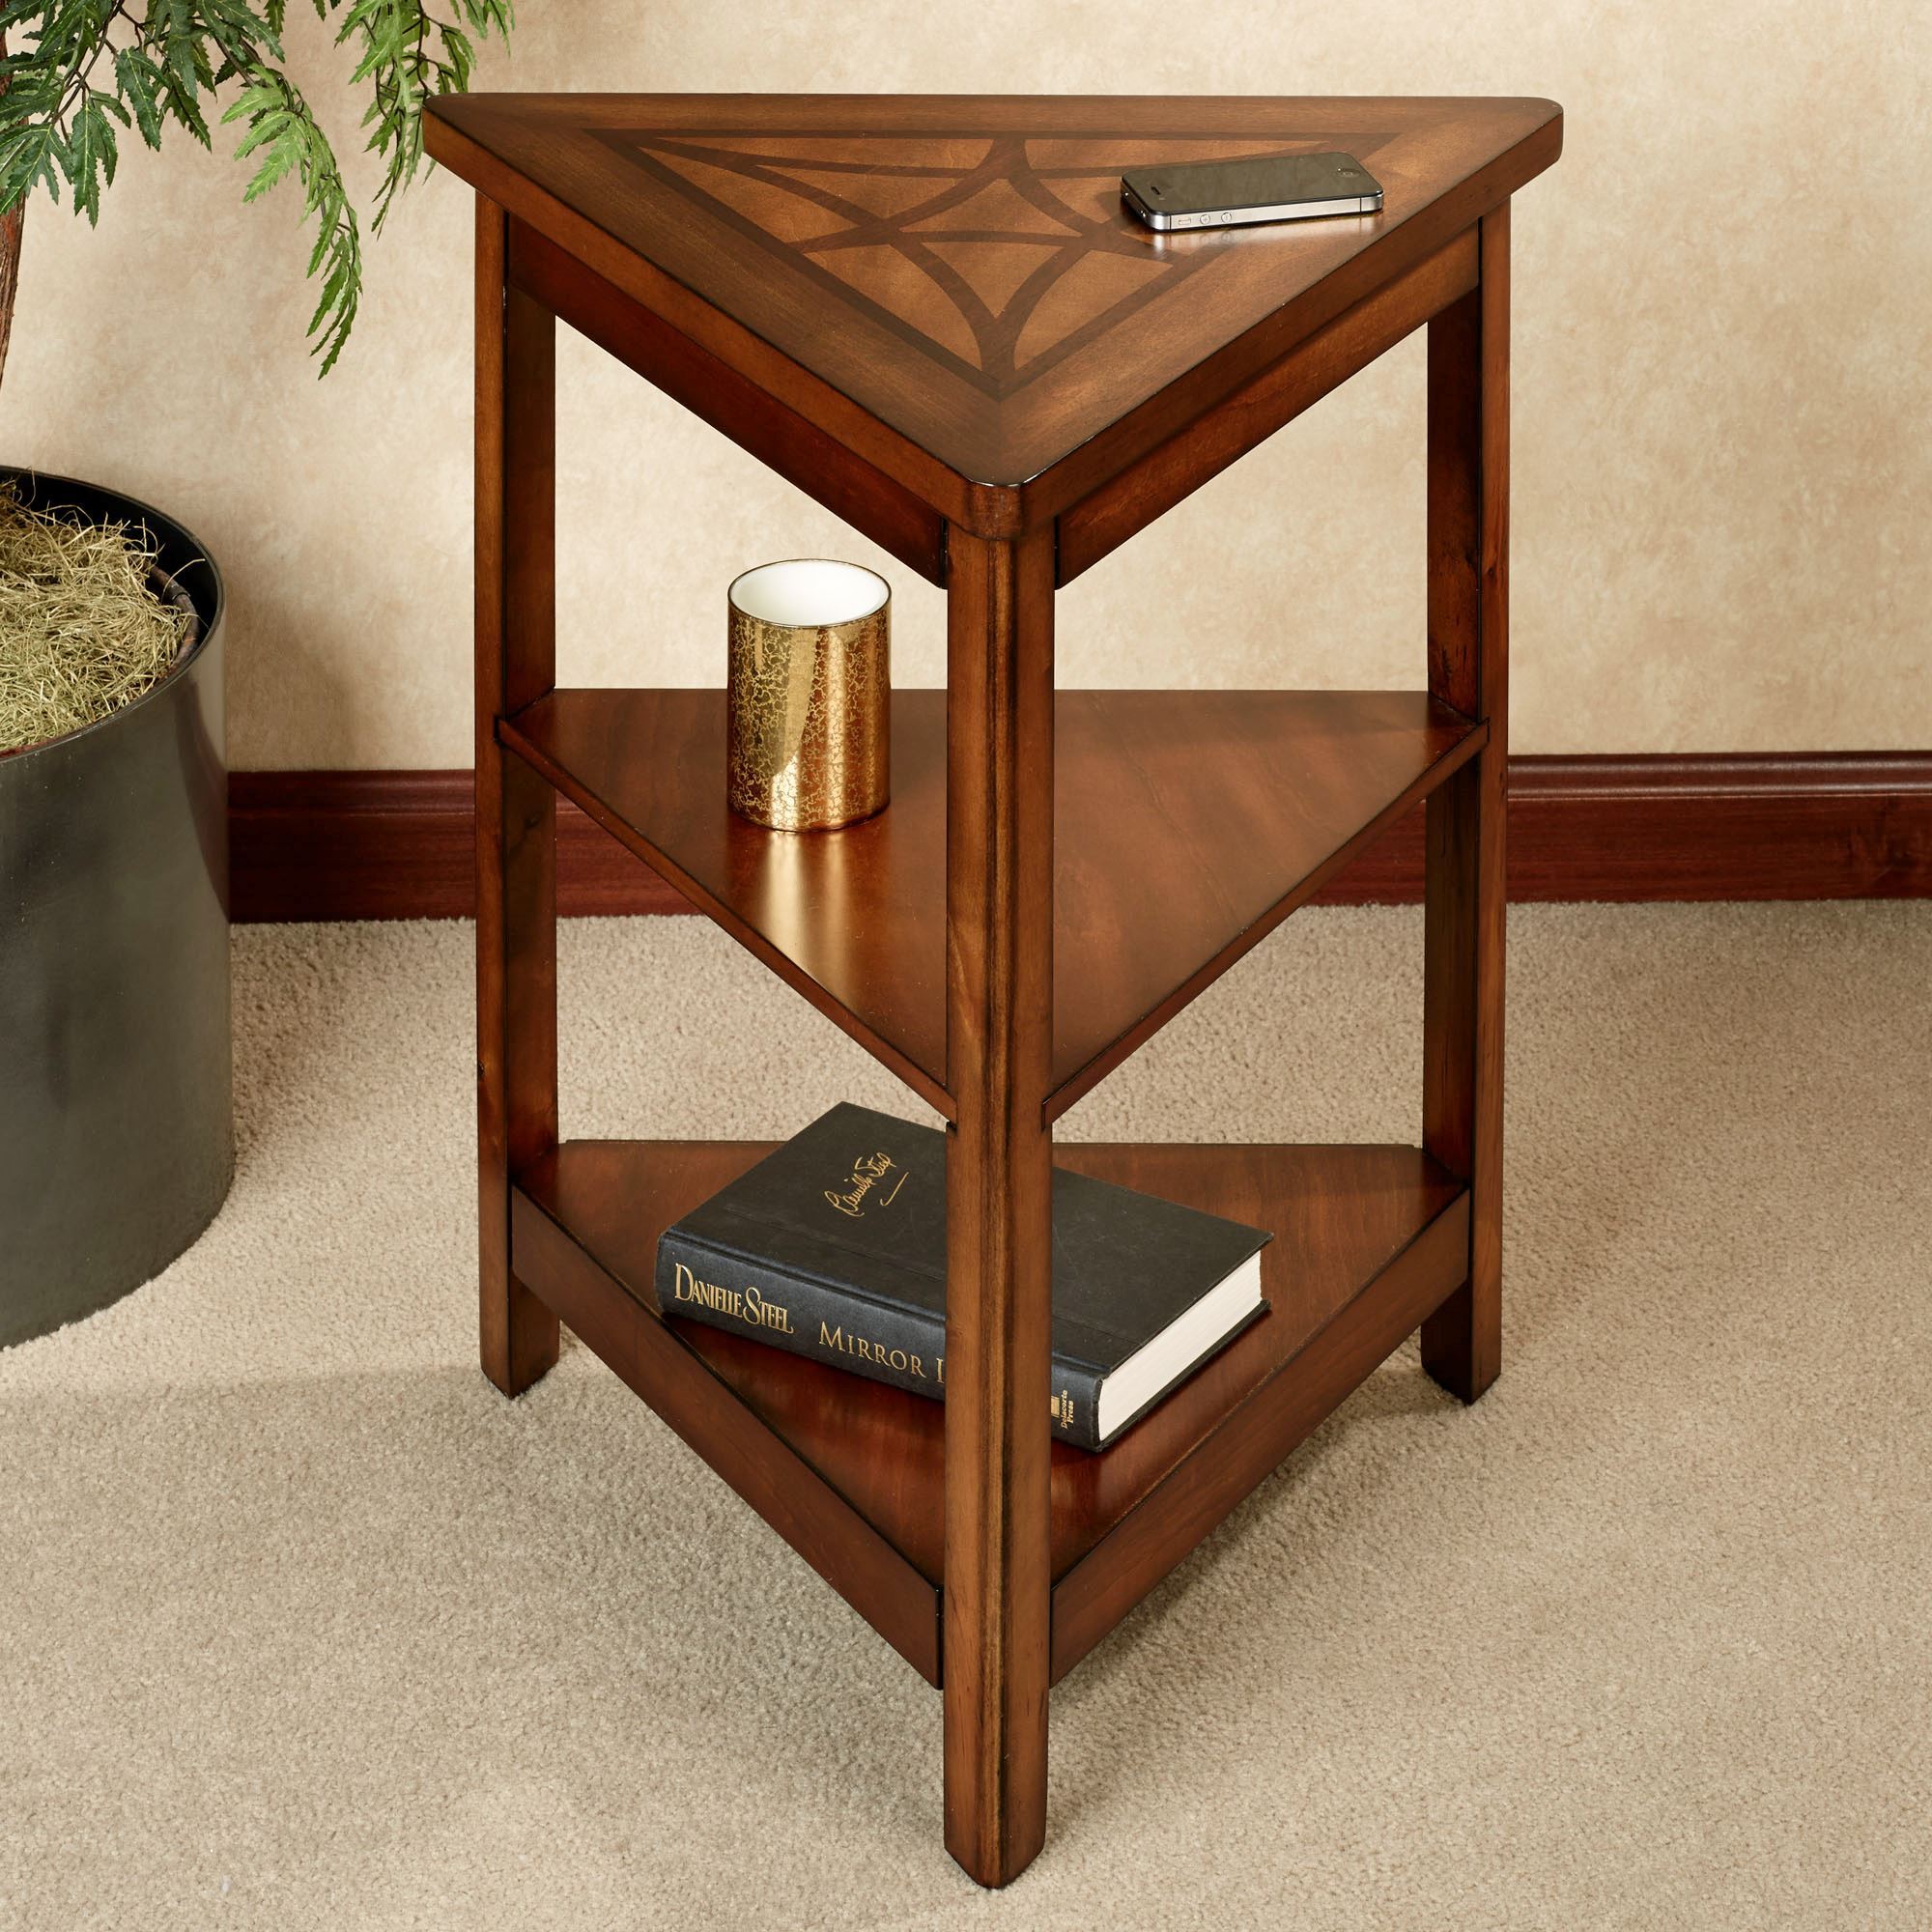 collection oak accent table with end serving tray amazing alluring small corner decor ideas home furniture metal coffee tables and smoked glass side black marble set pier one